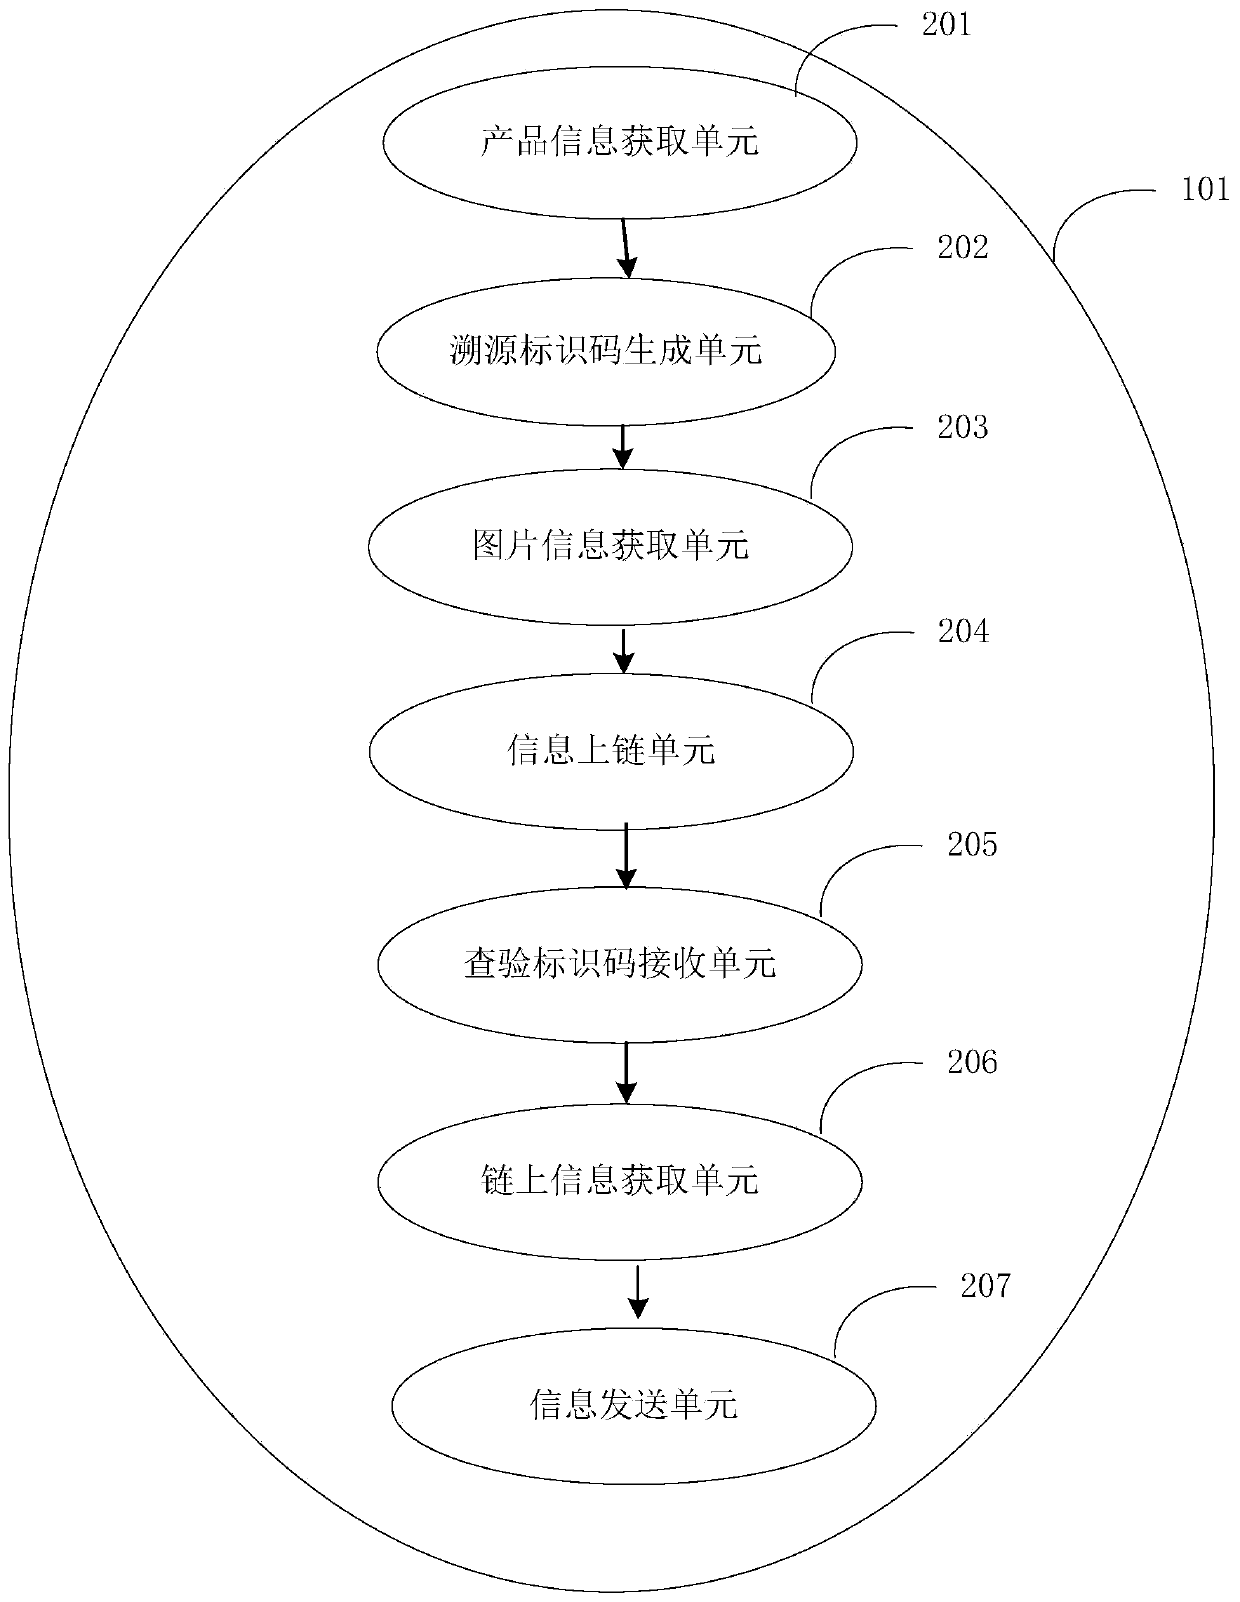 Product anti-counterfeiting traceability system and method